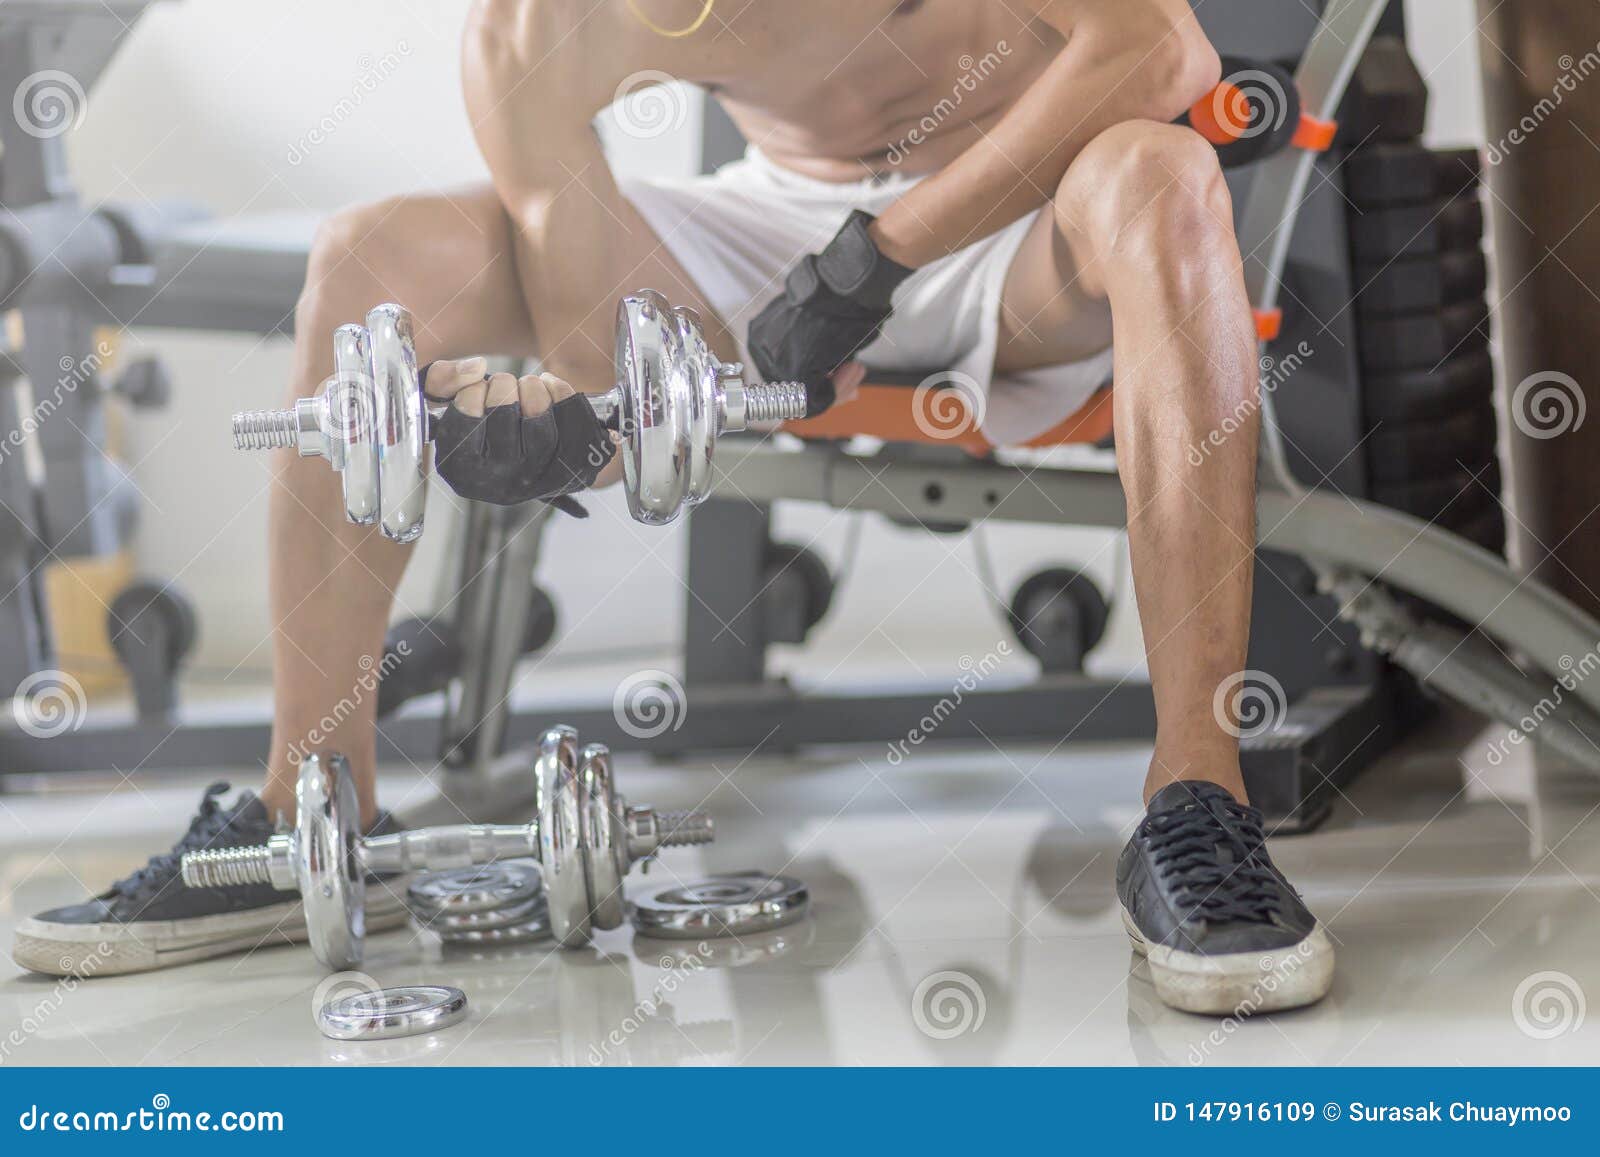 Fitness Man Healthy Stock Image Image Of Weight Arms 147916109